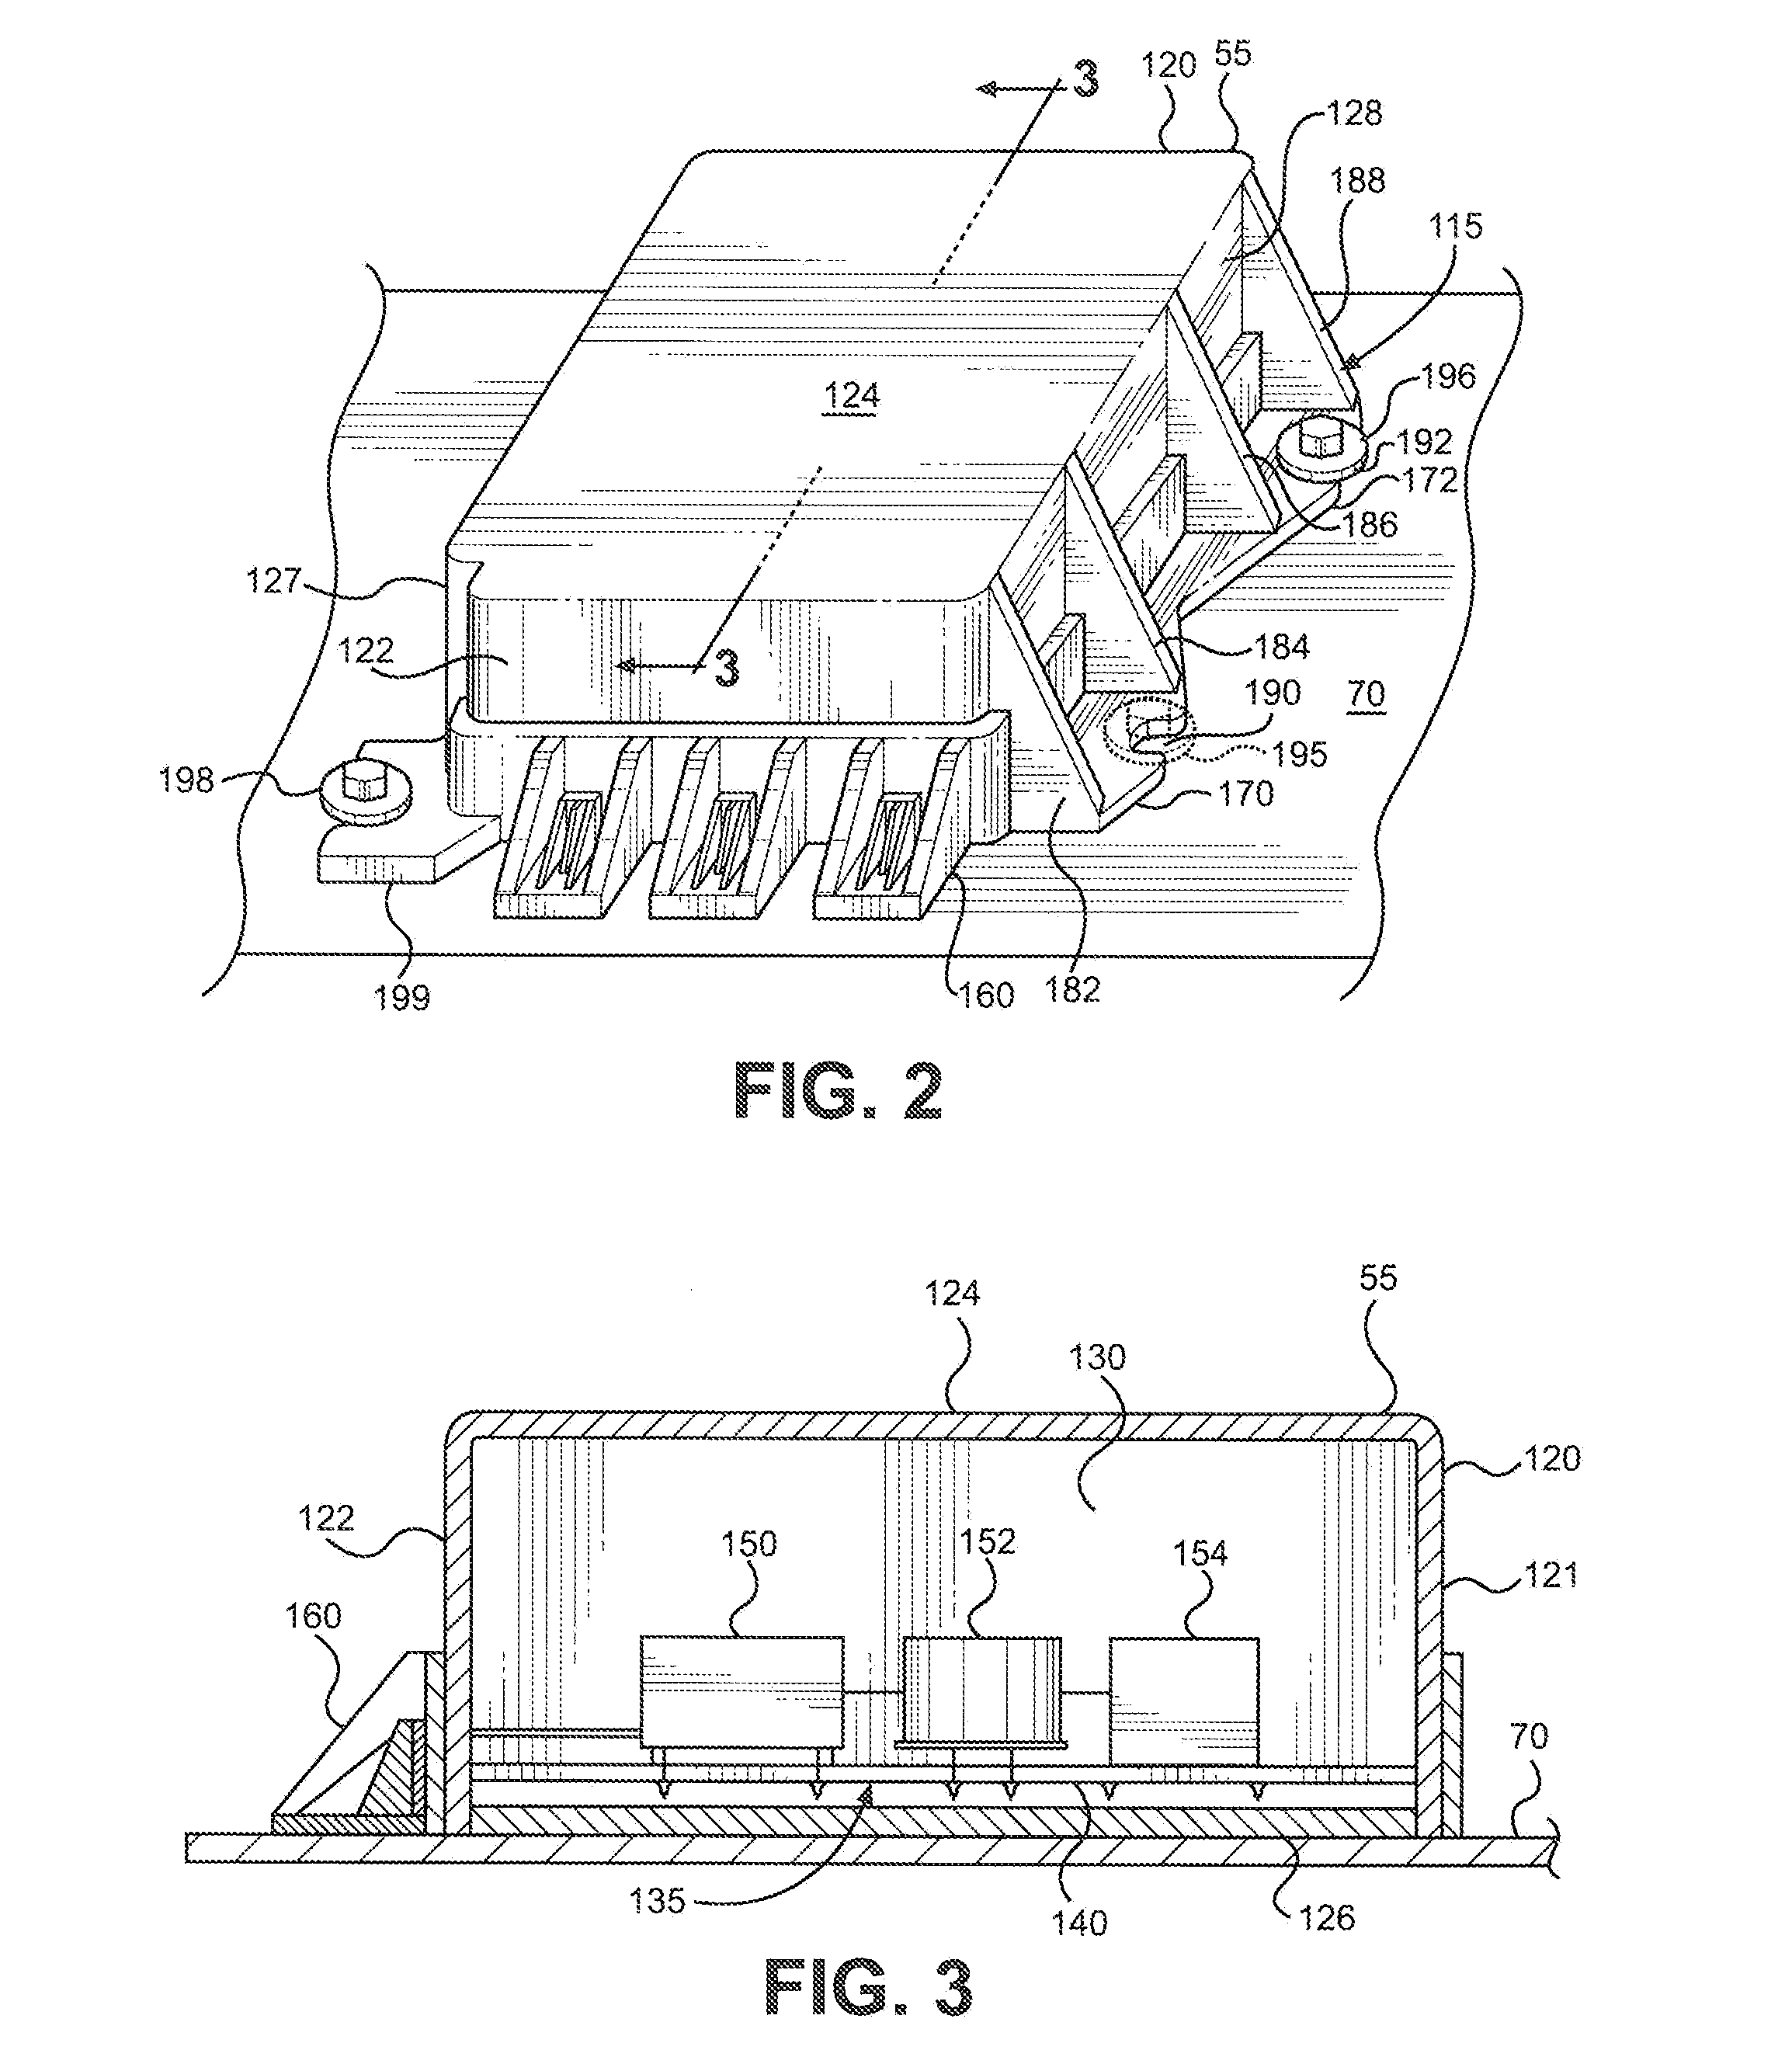 Mounting System for an Electronic Control Module Housing in a Vehicle